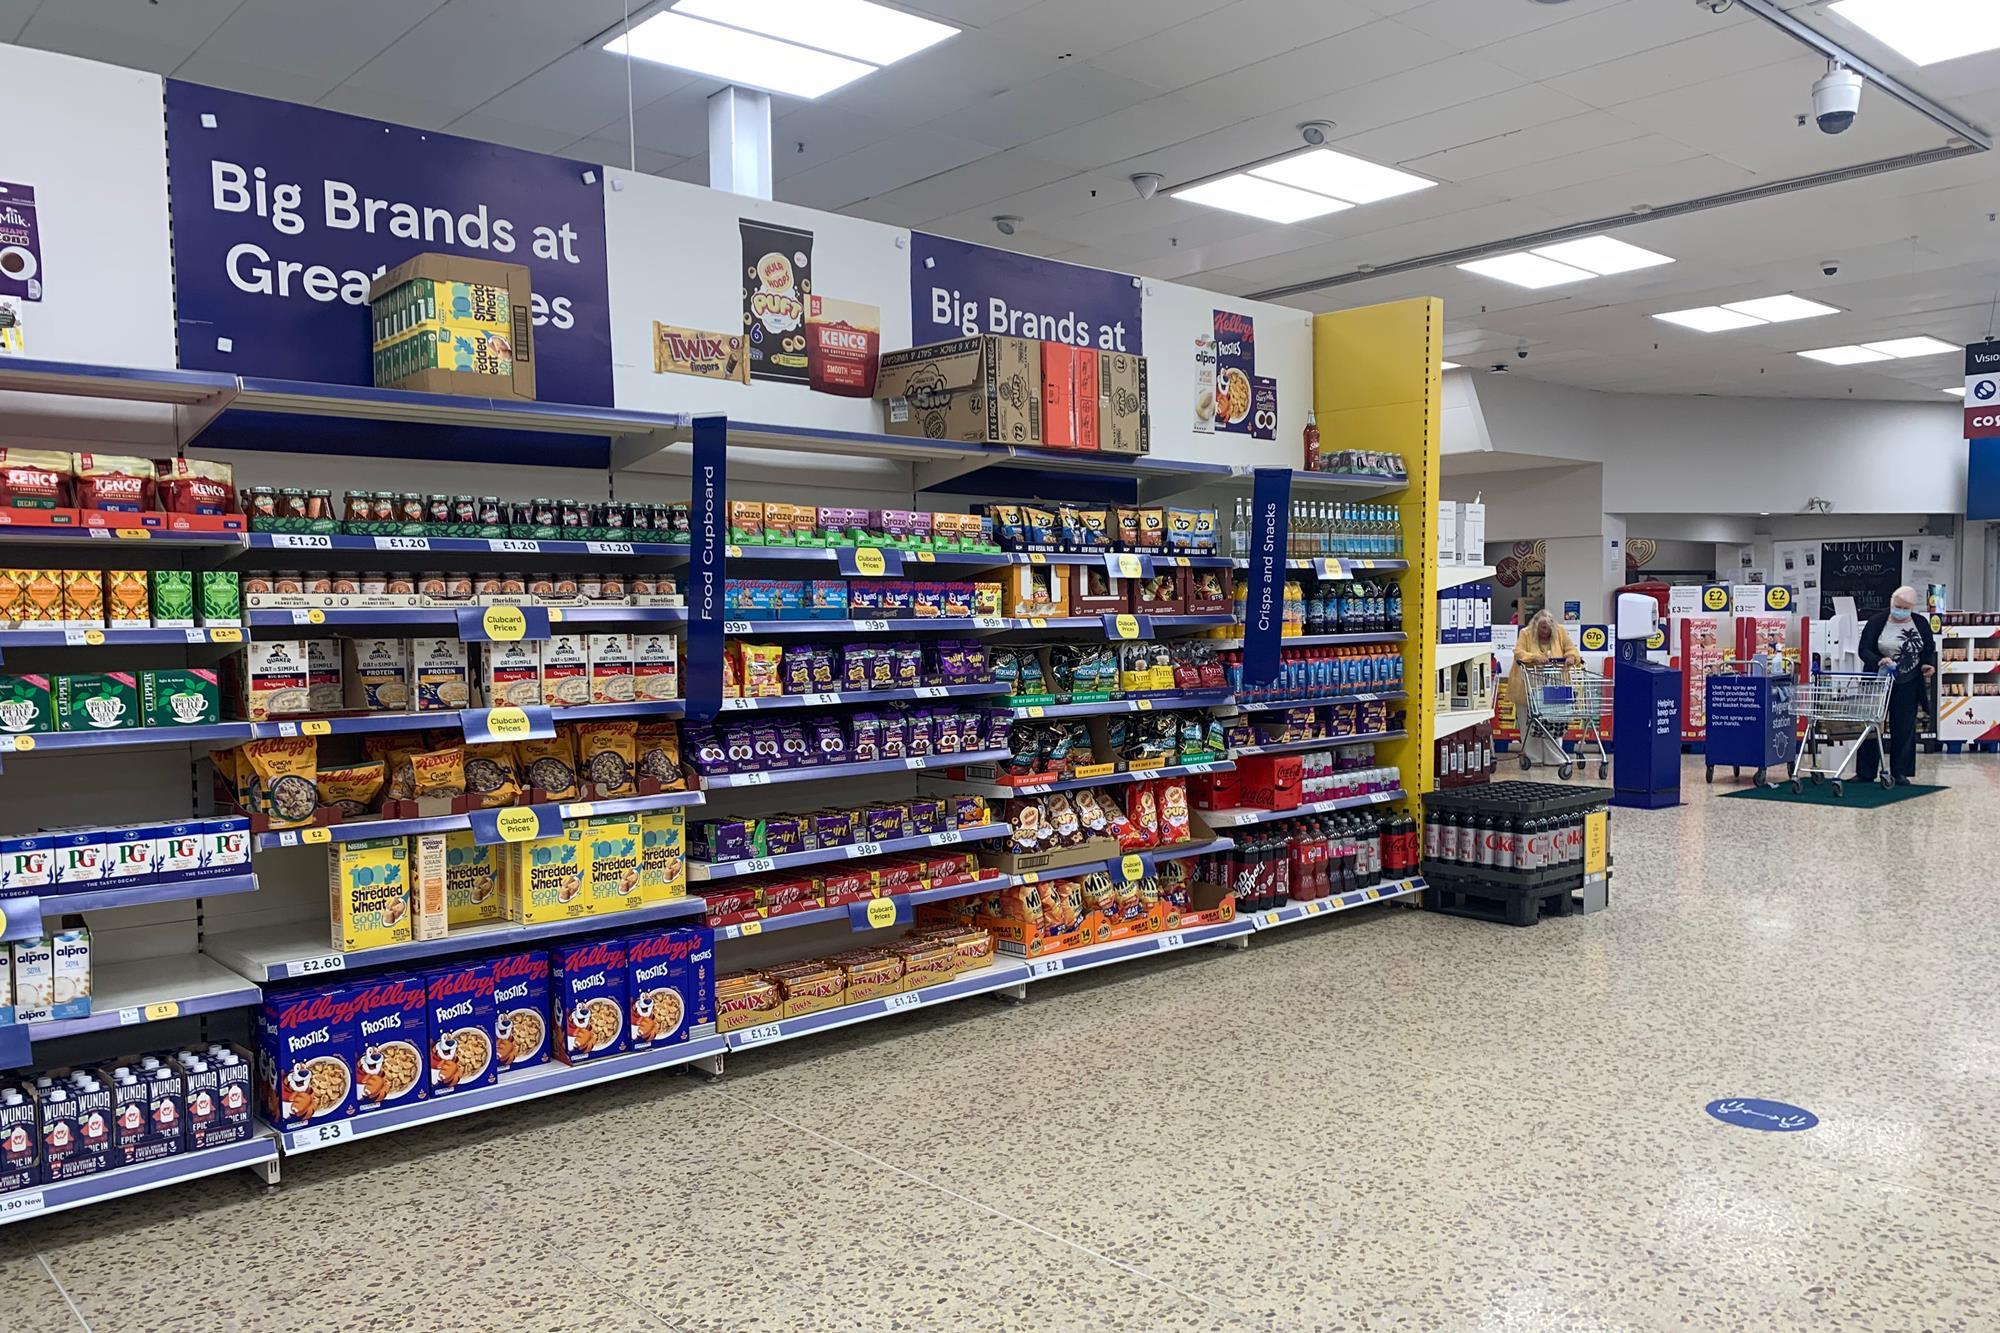 Tesco scores easy Grocer 33 win with excellent stock availability